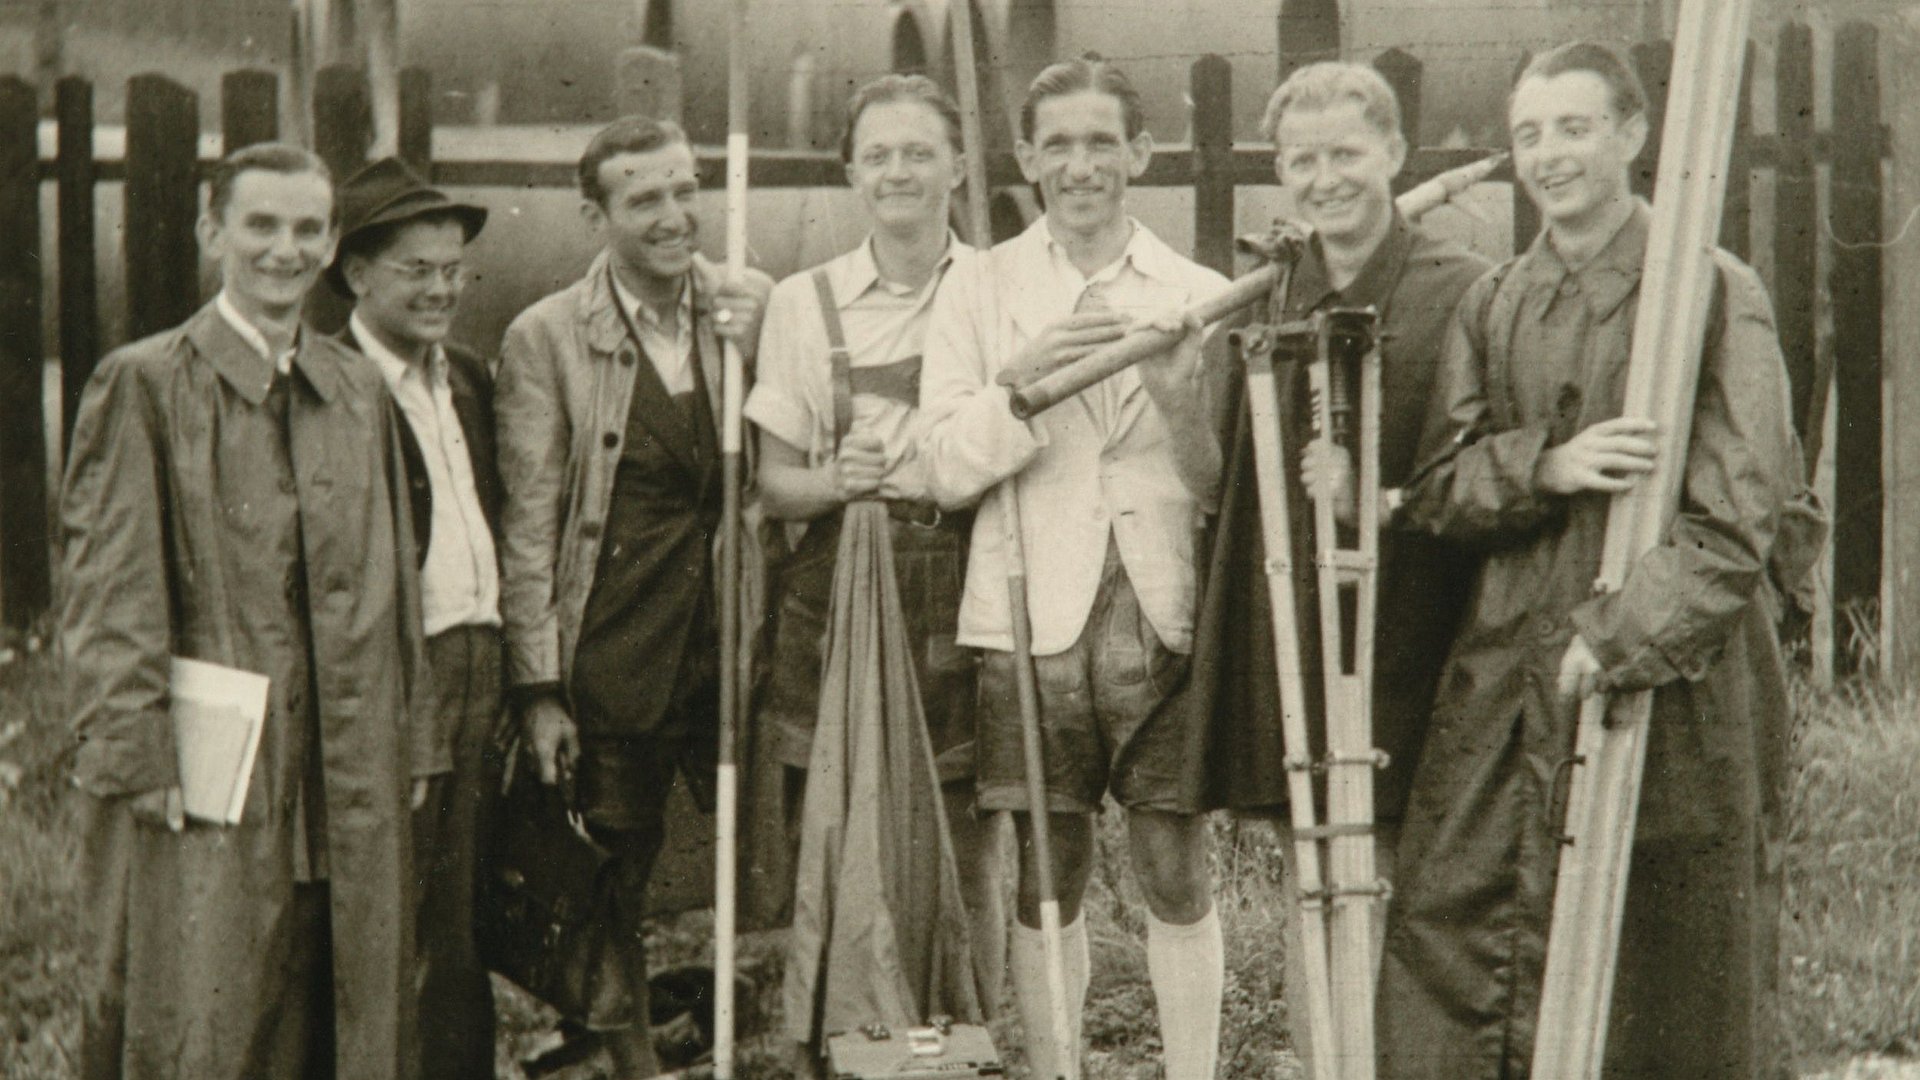 uture civil engineers on an excursion after an exercise in triangulation in the year 1950.